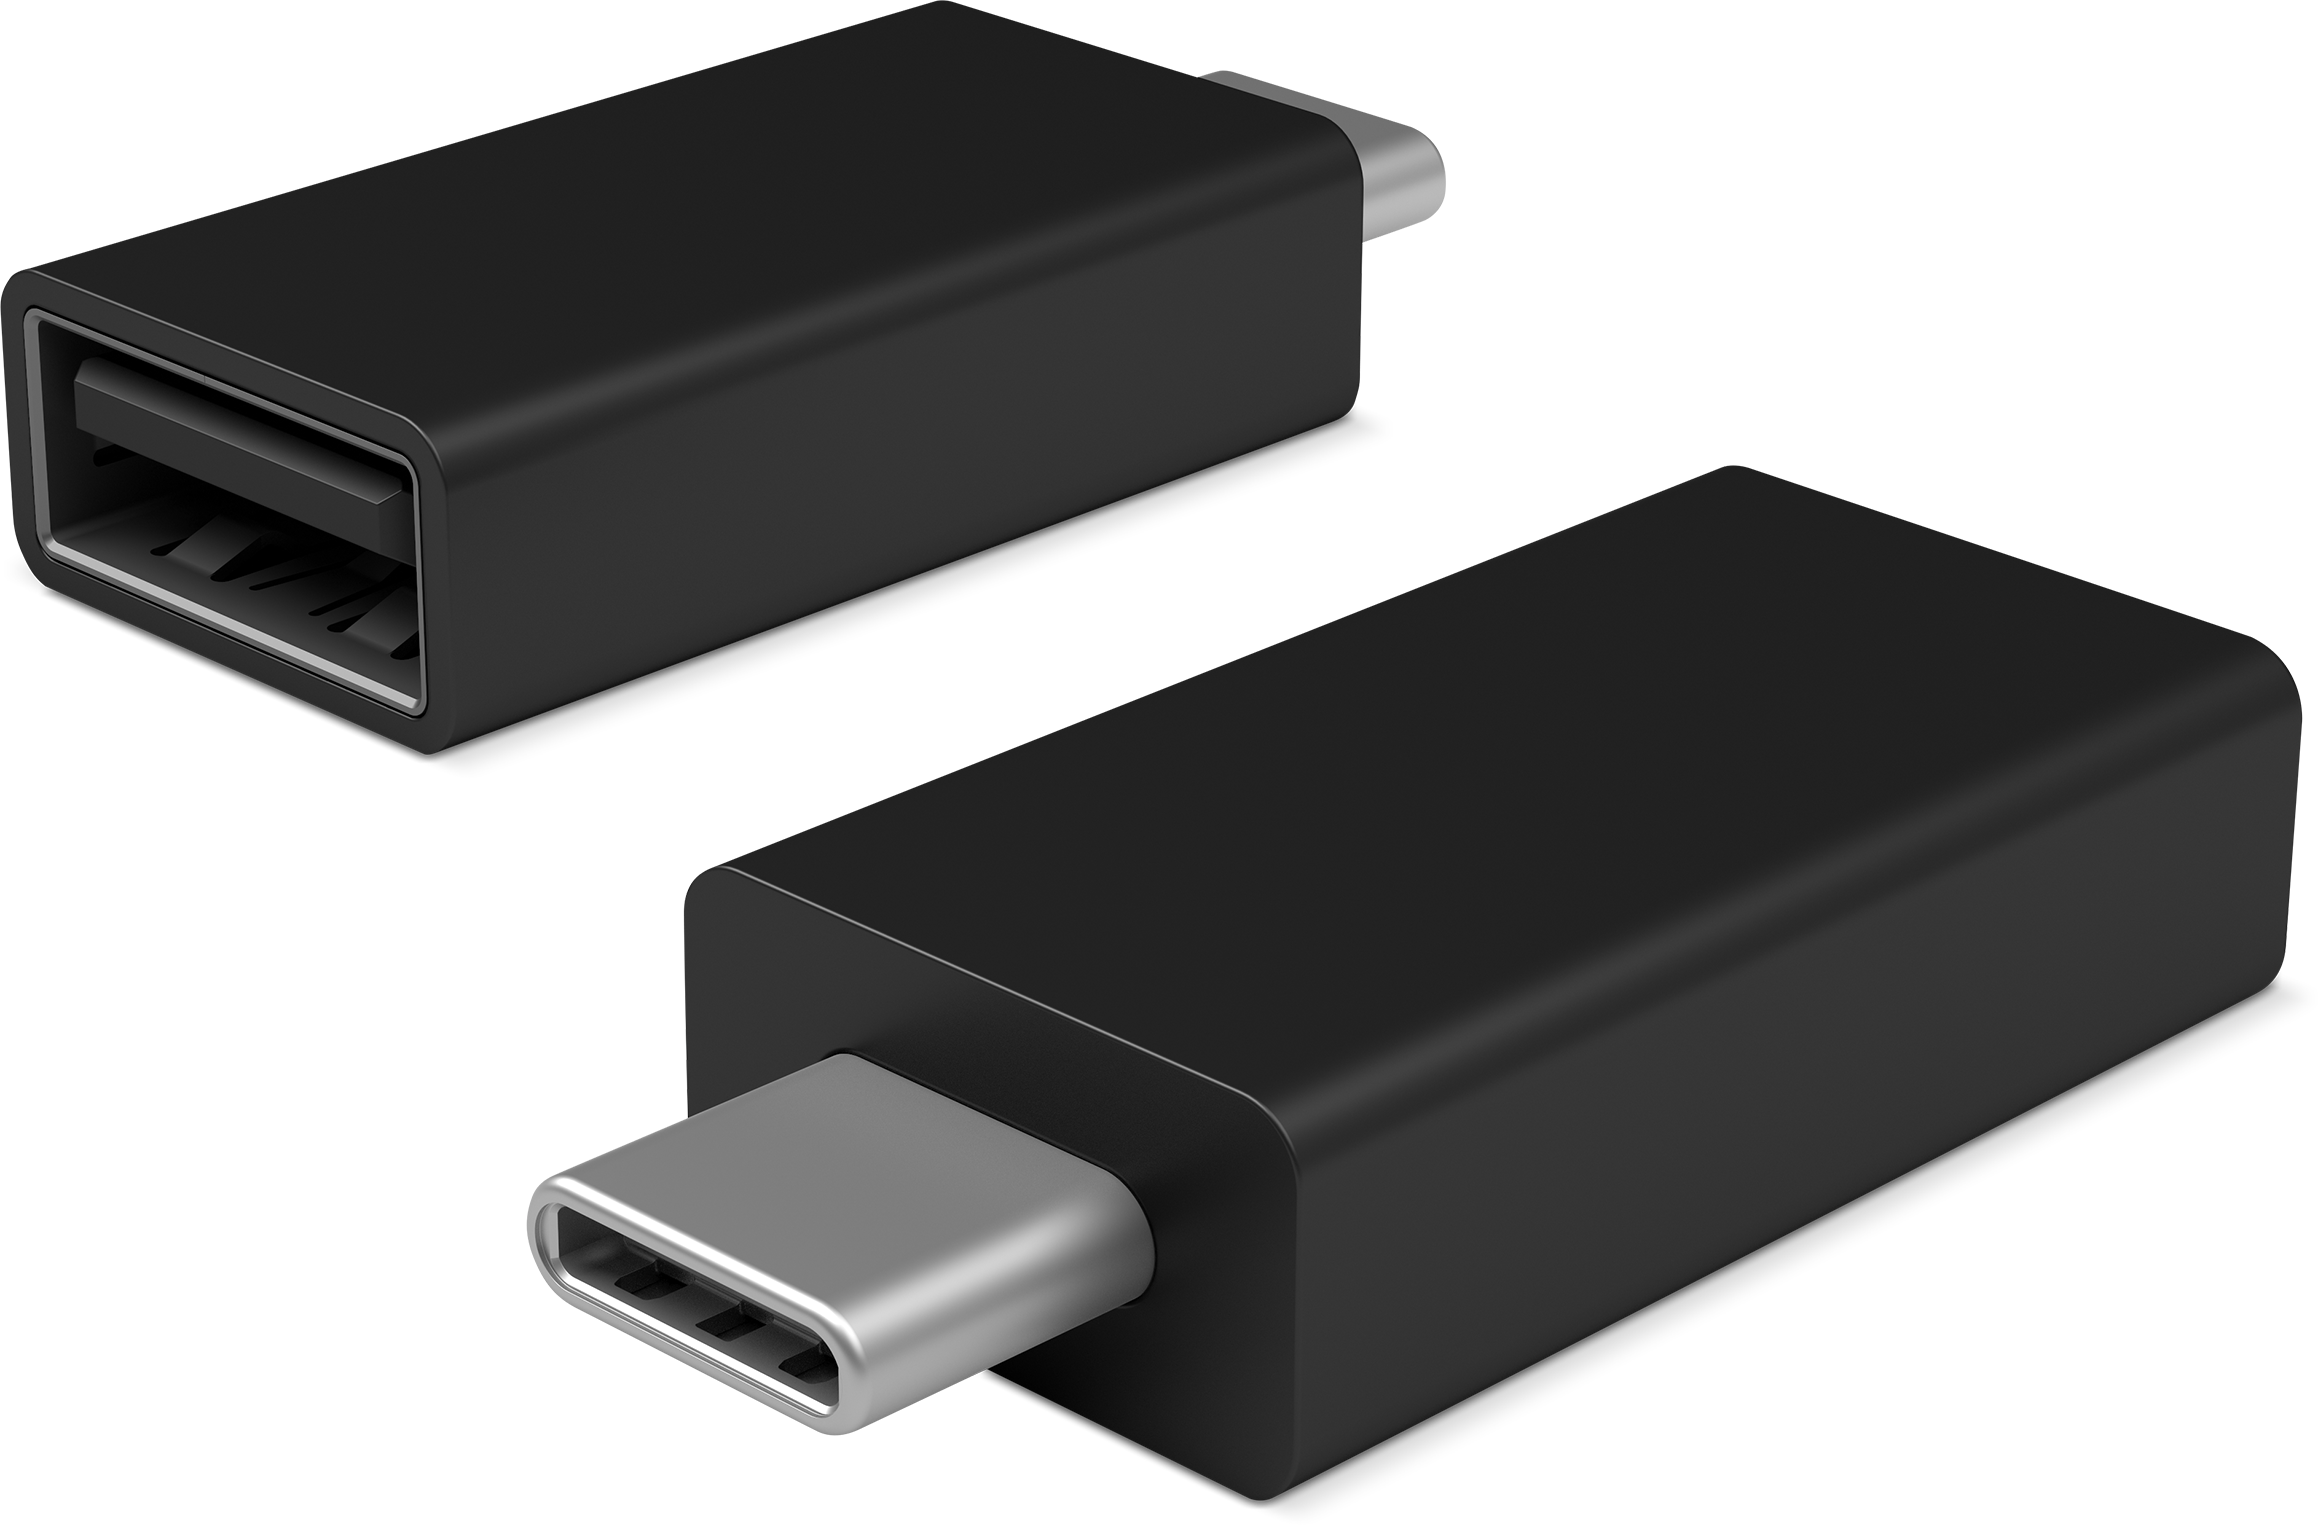 Surface USB-C to USB Adapter Price